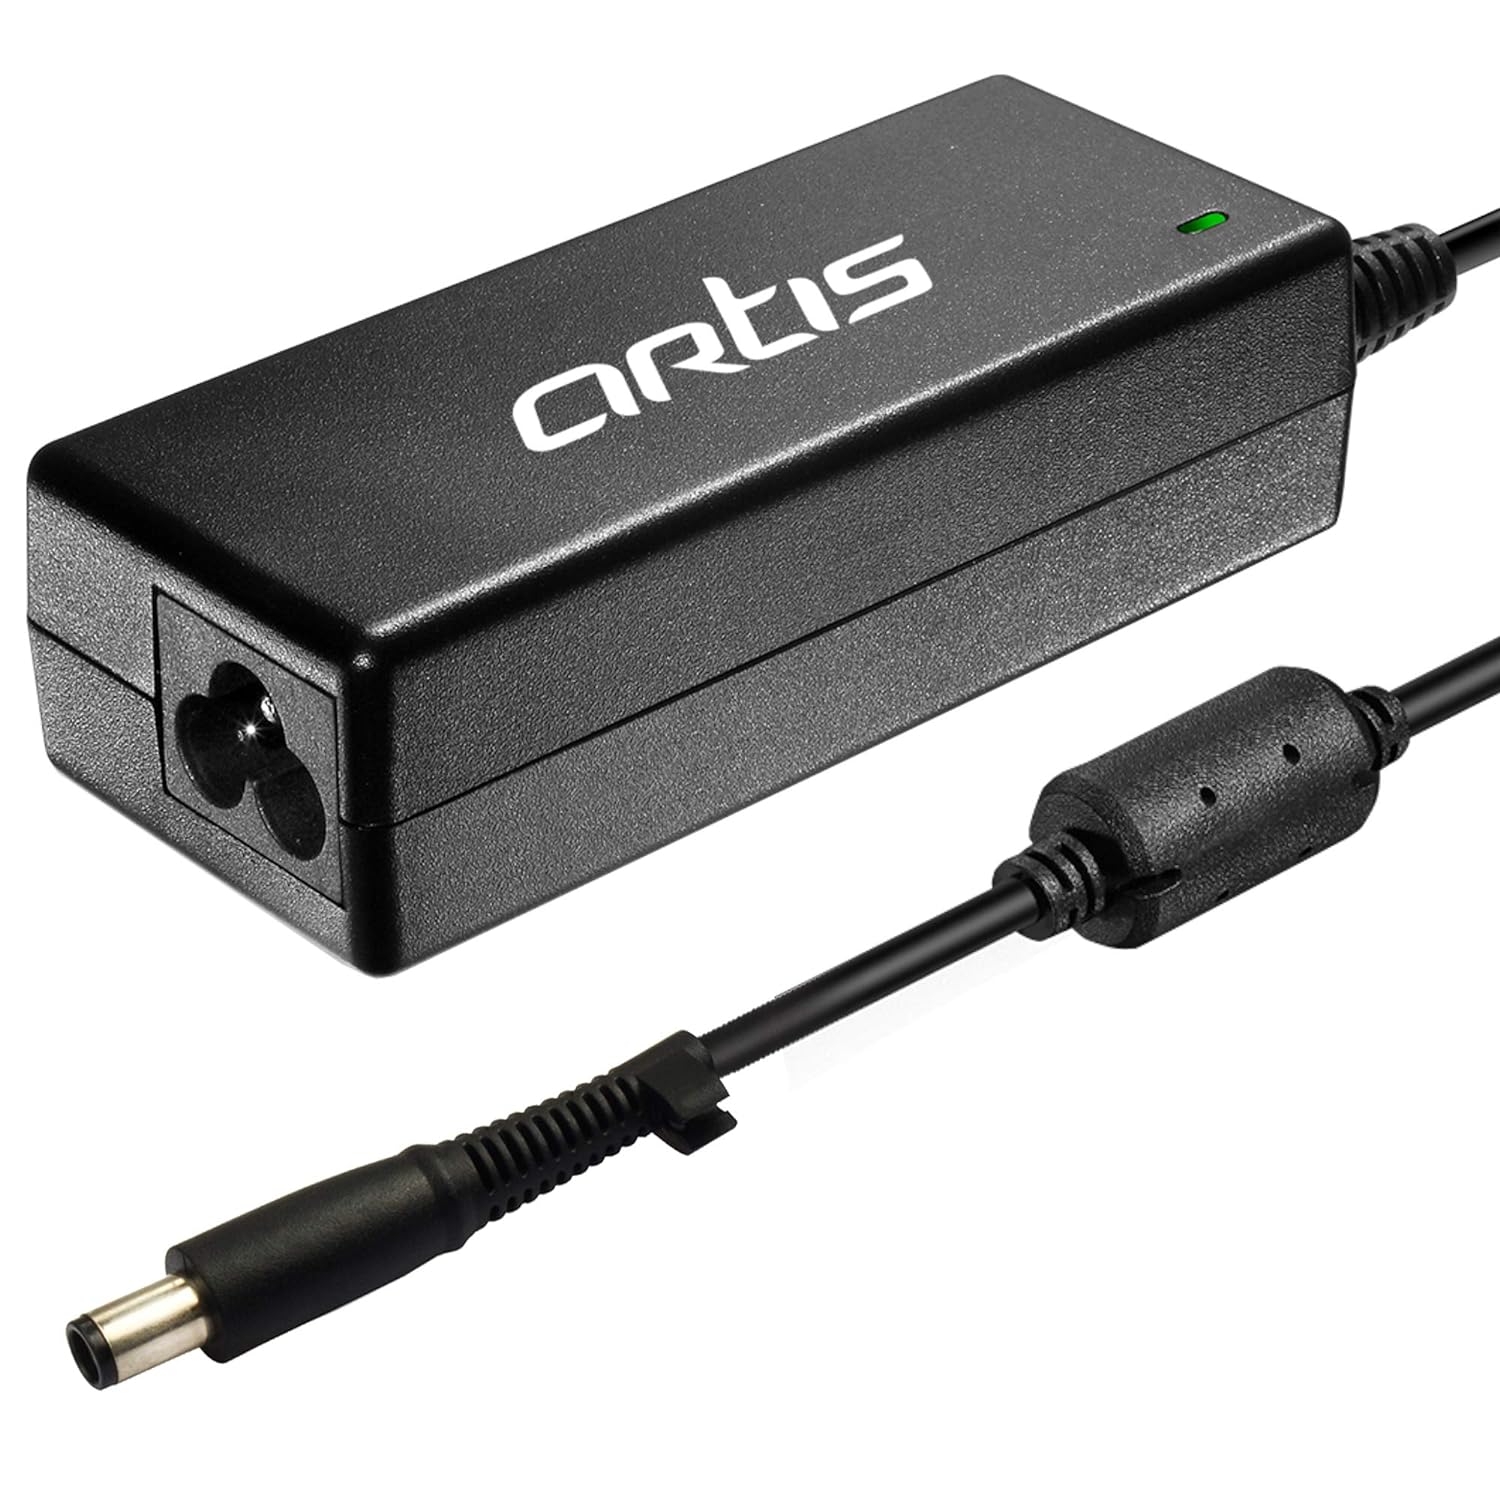 Artis AR0501 65 Watts Laptop Adapter Charger with Power Cord | 19.5V/3.34A | 7.4x5.0mm Pin